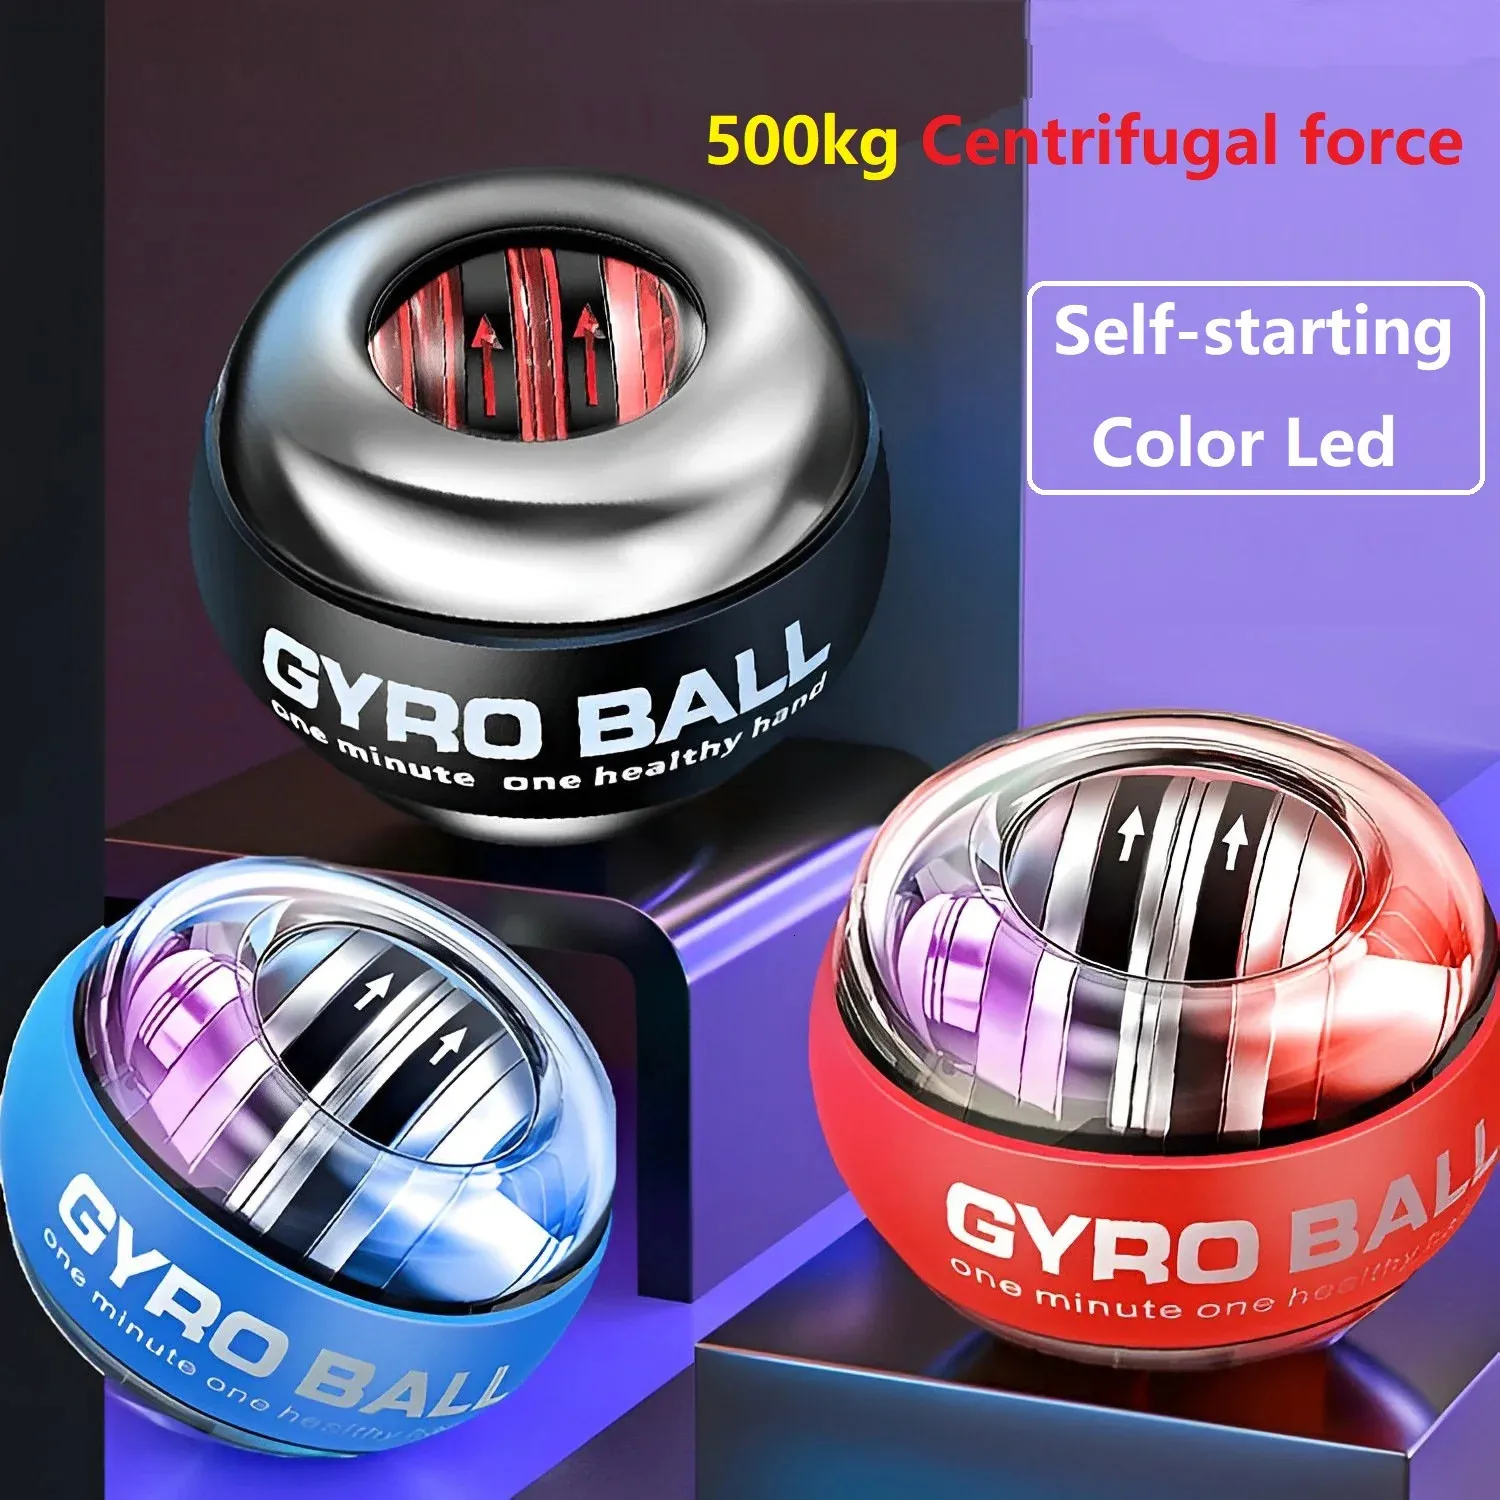 Power Wrists LED -handleden Power Ball Pull Rep Start Gyro Powerball Gym Home Arm Hand Muscle Force Trainer Träningsutrustning 231012